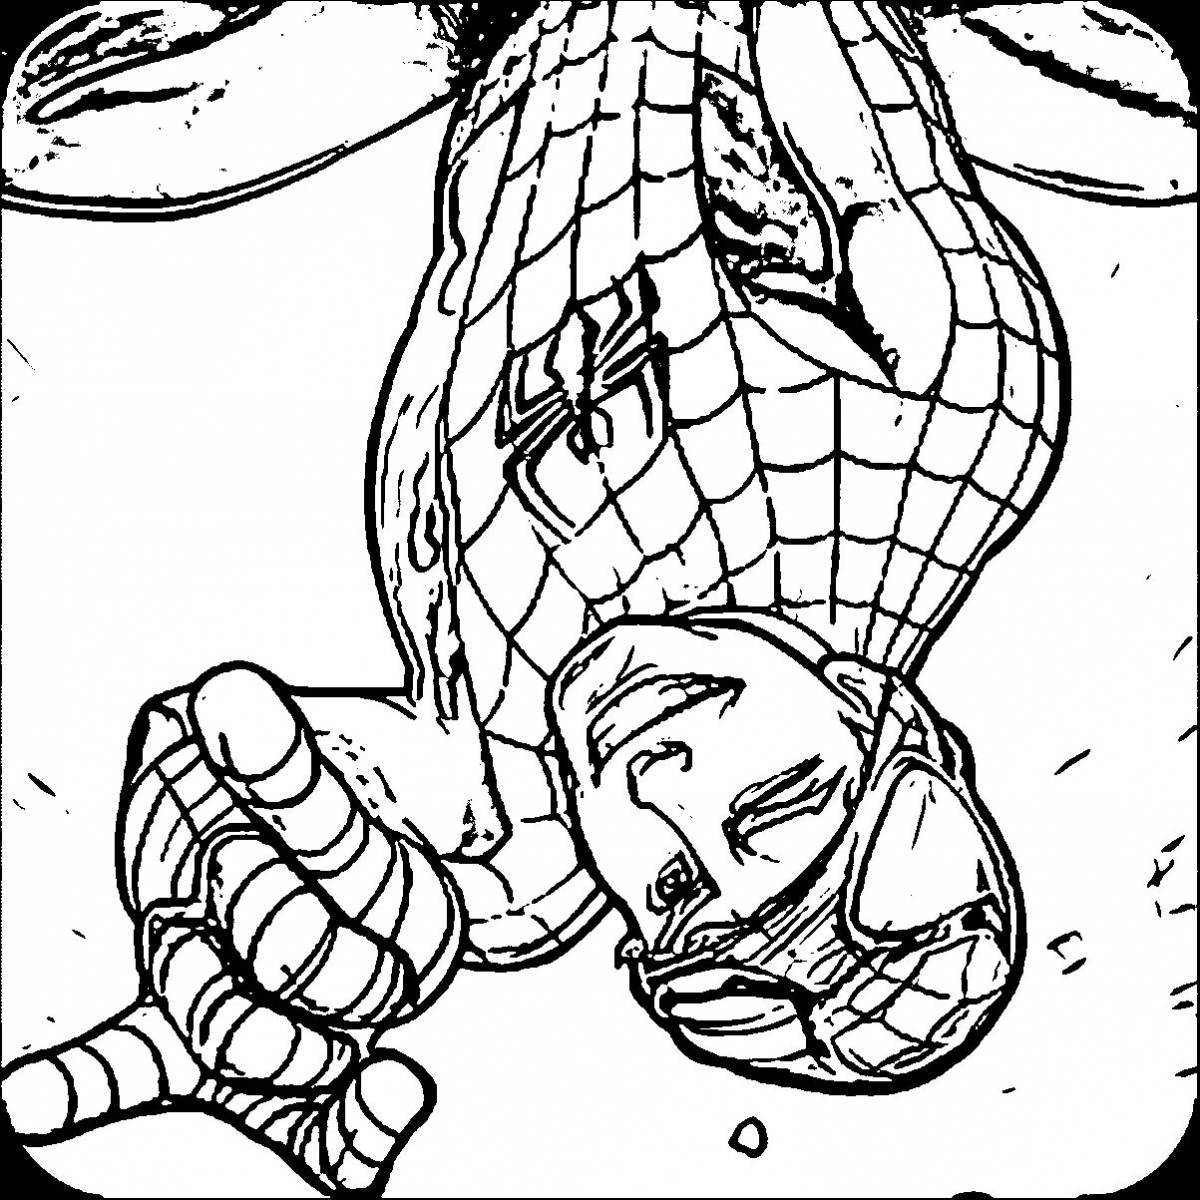 Marvelous spiderman and iron man coloring pages for kids